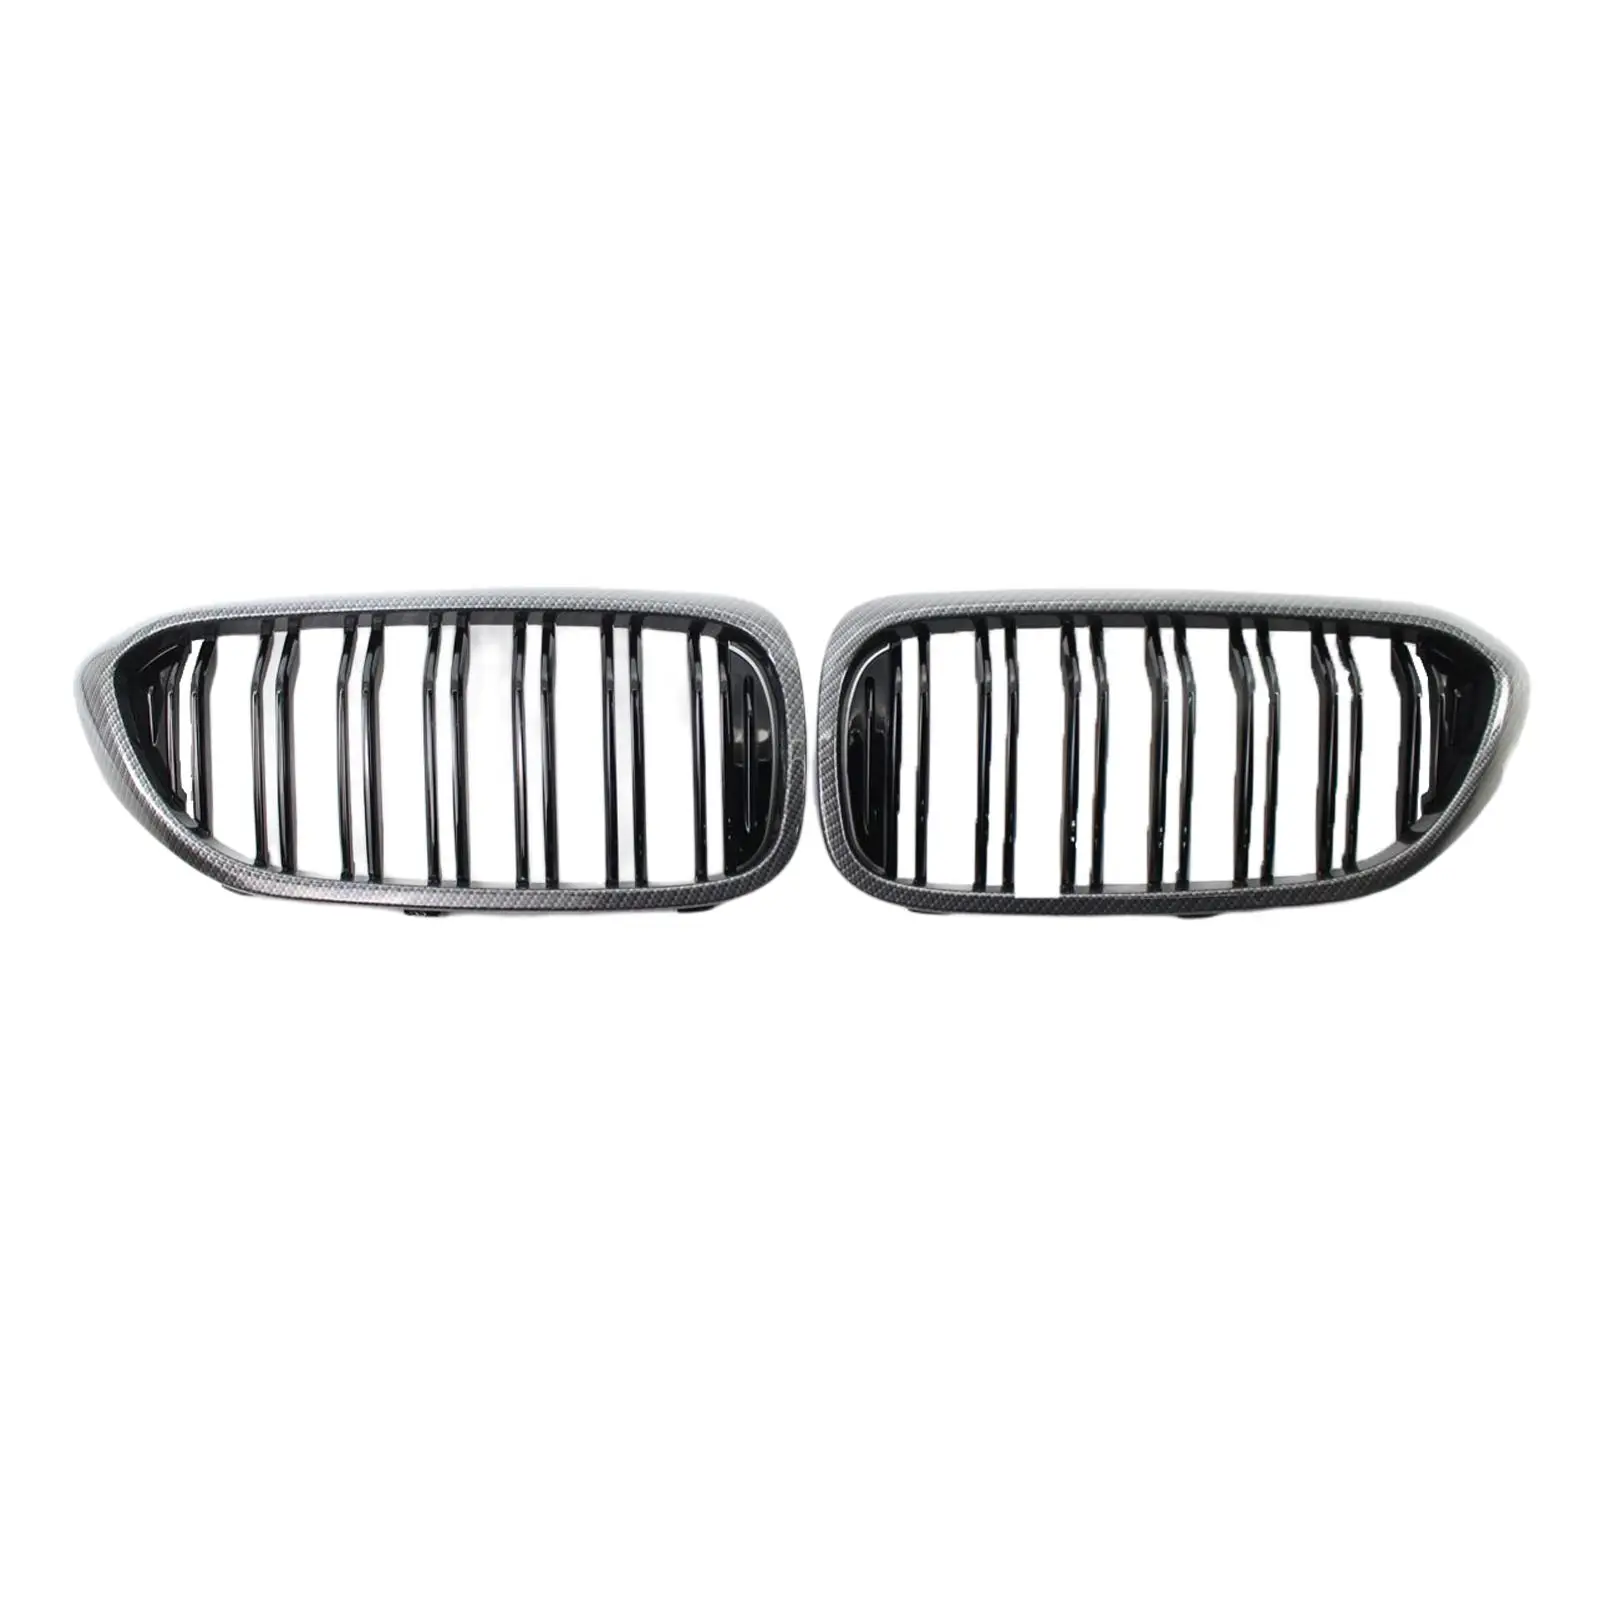 2 Pieces Car Front Kidney Grille Grill Bumper Grille Fit for BMW 5 Series G30 G31 G38 2017-19 520i 540i Accessories Spare Parts